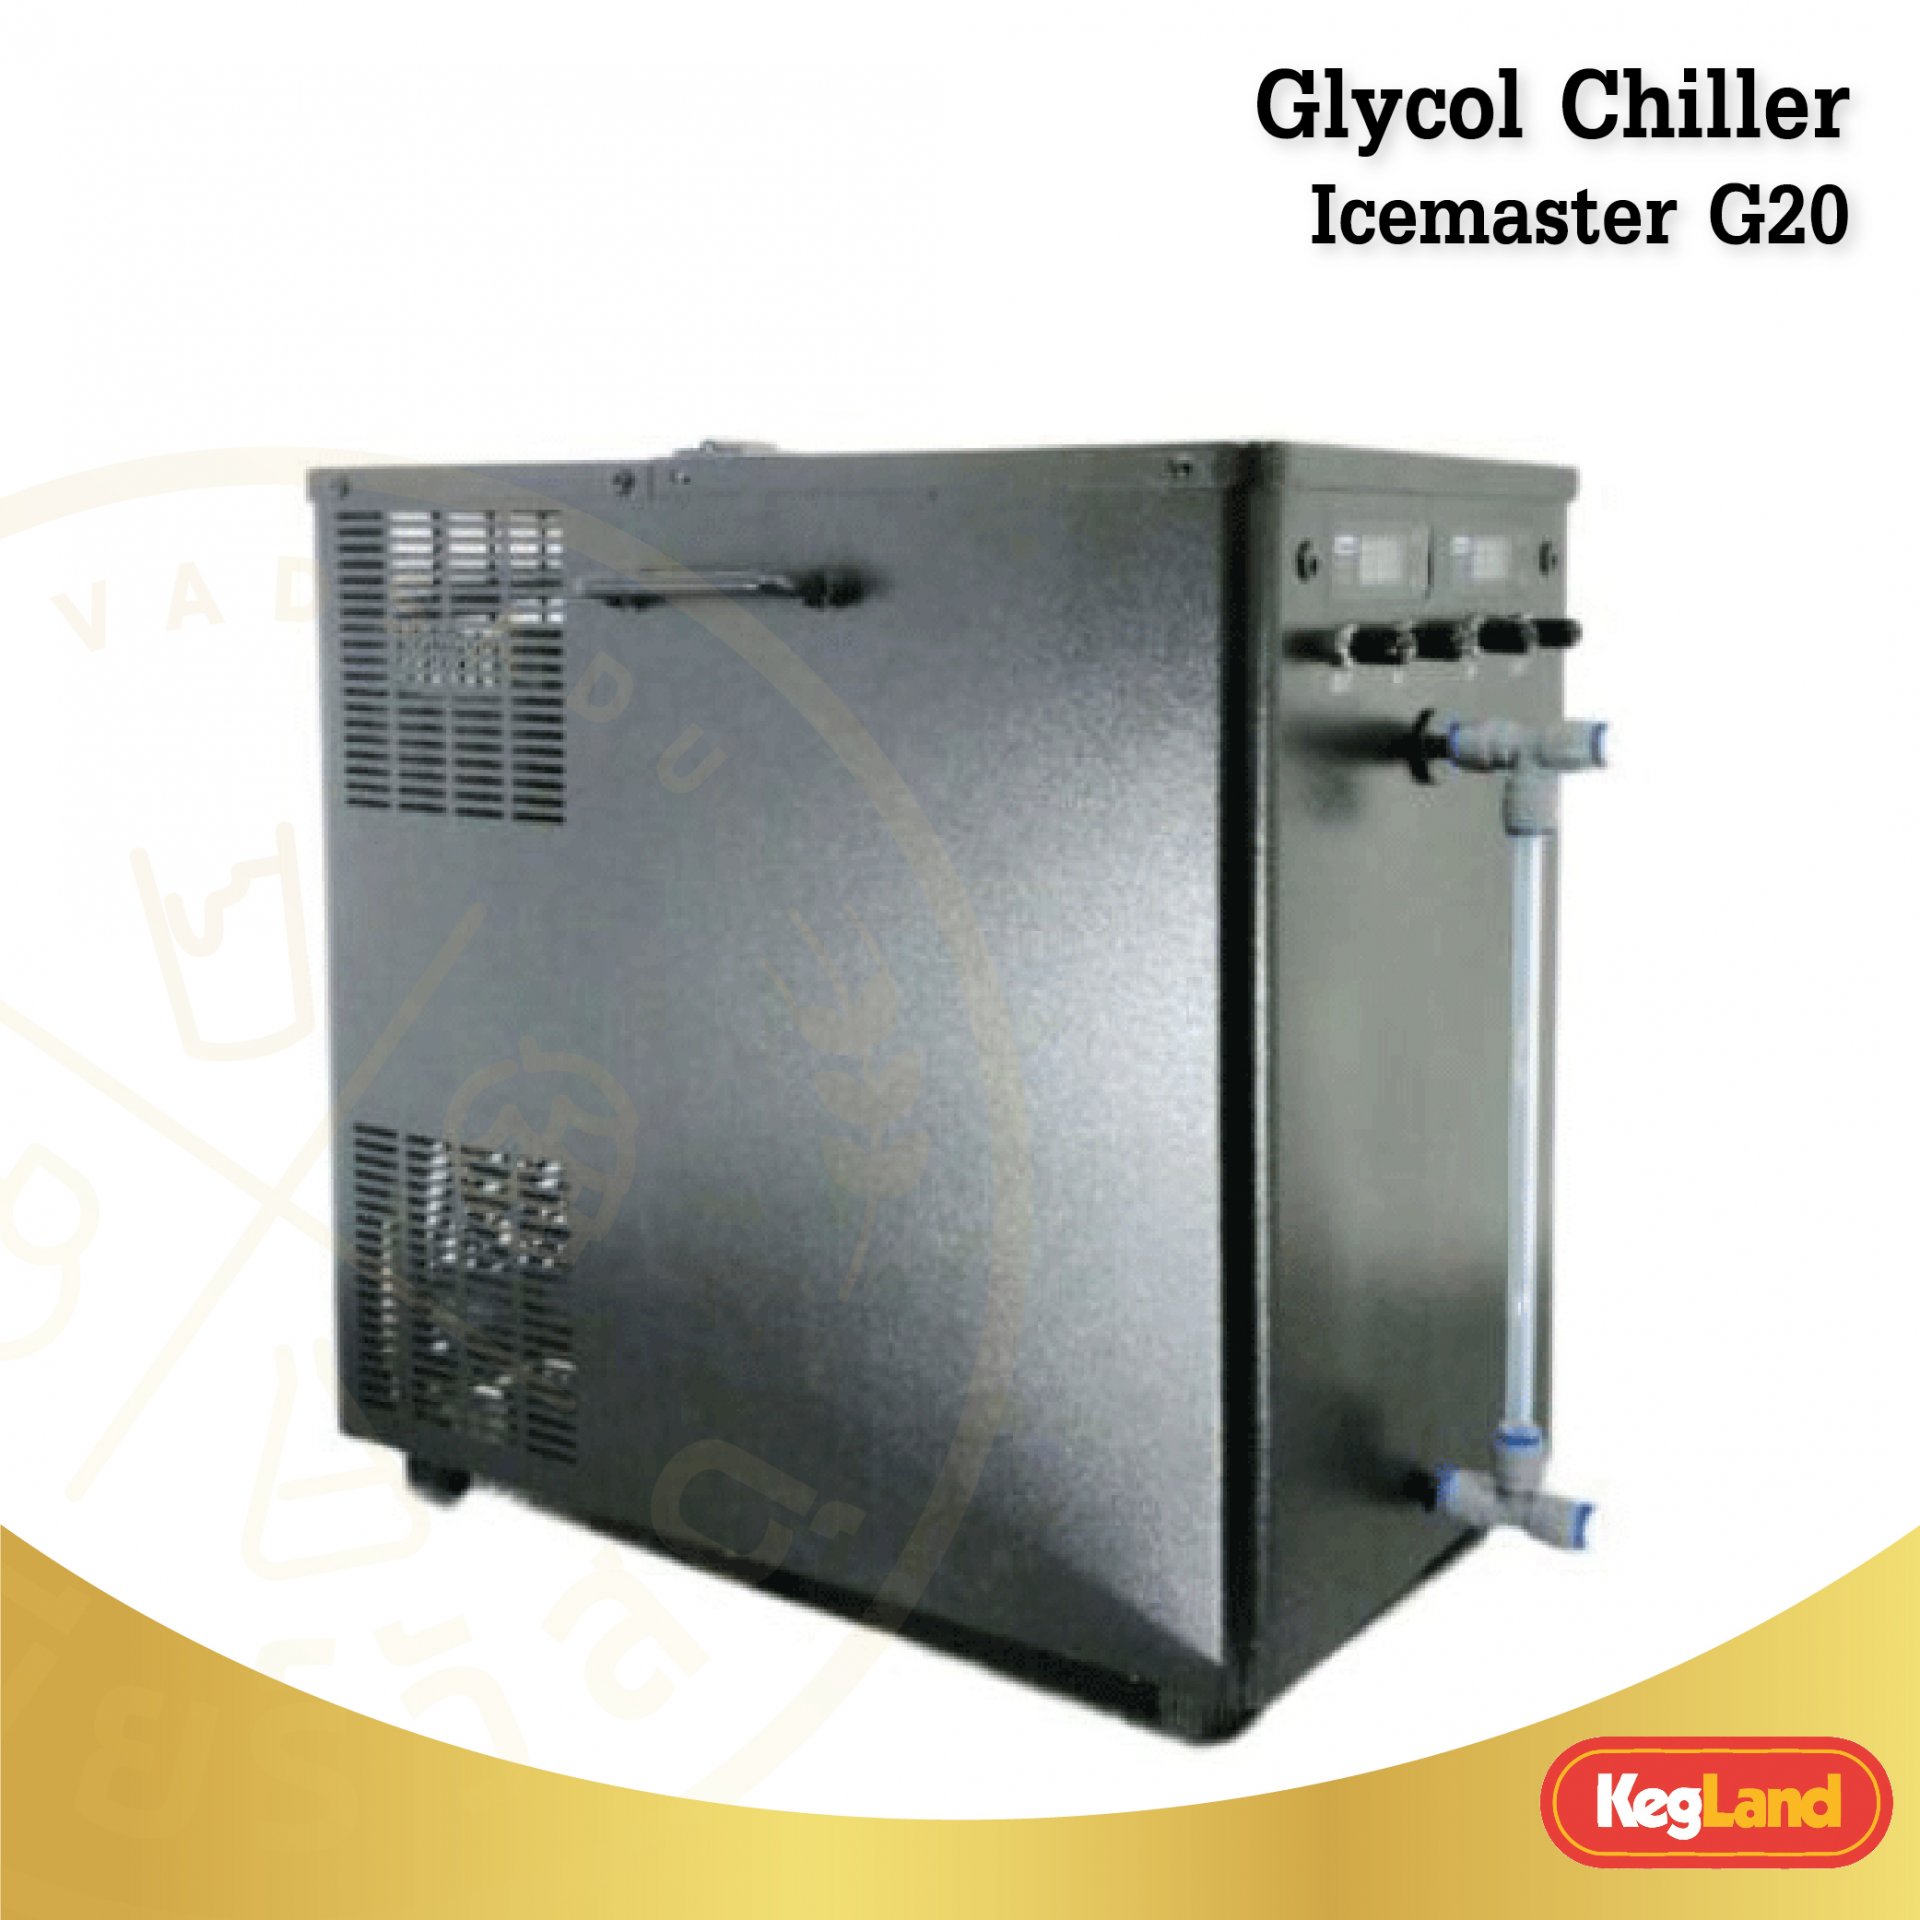 Glycol Chiller Icemaster G20